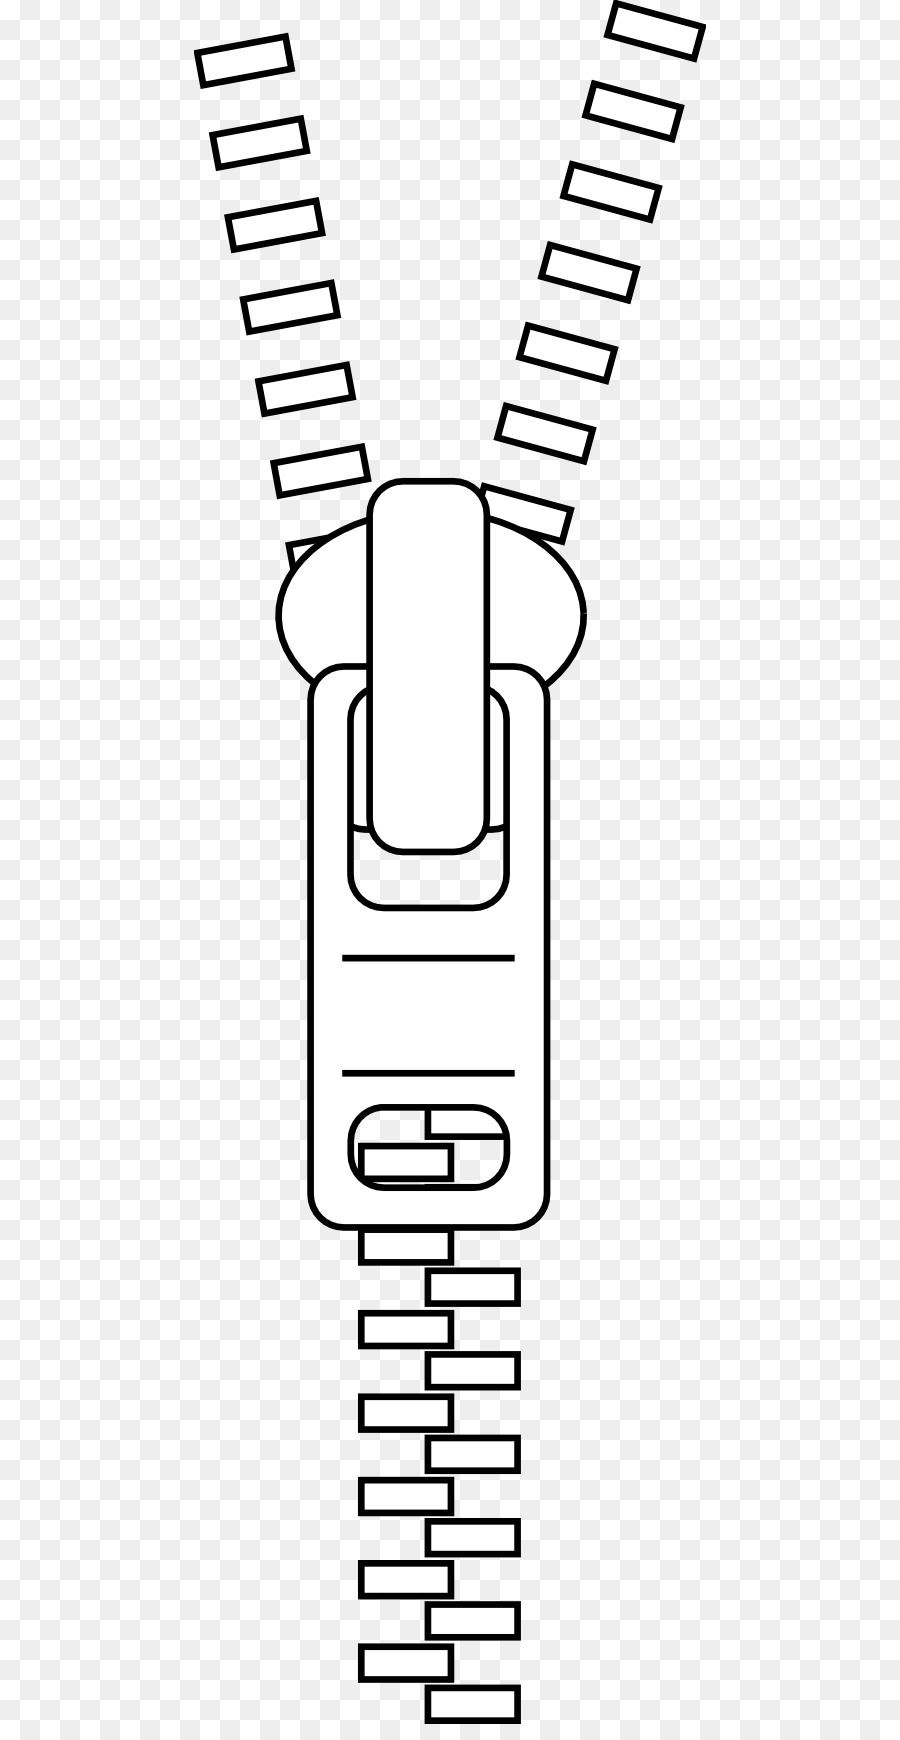 Zipper clipart logo. Black and white png